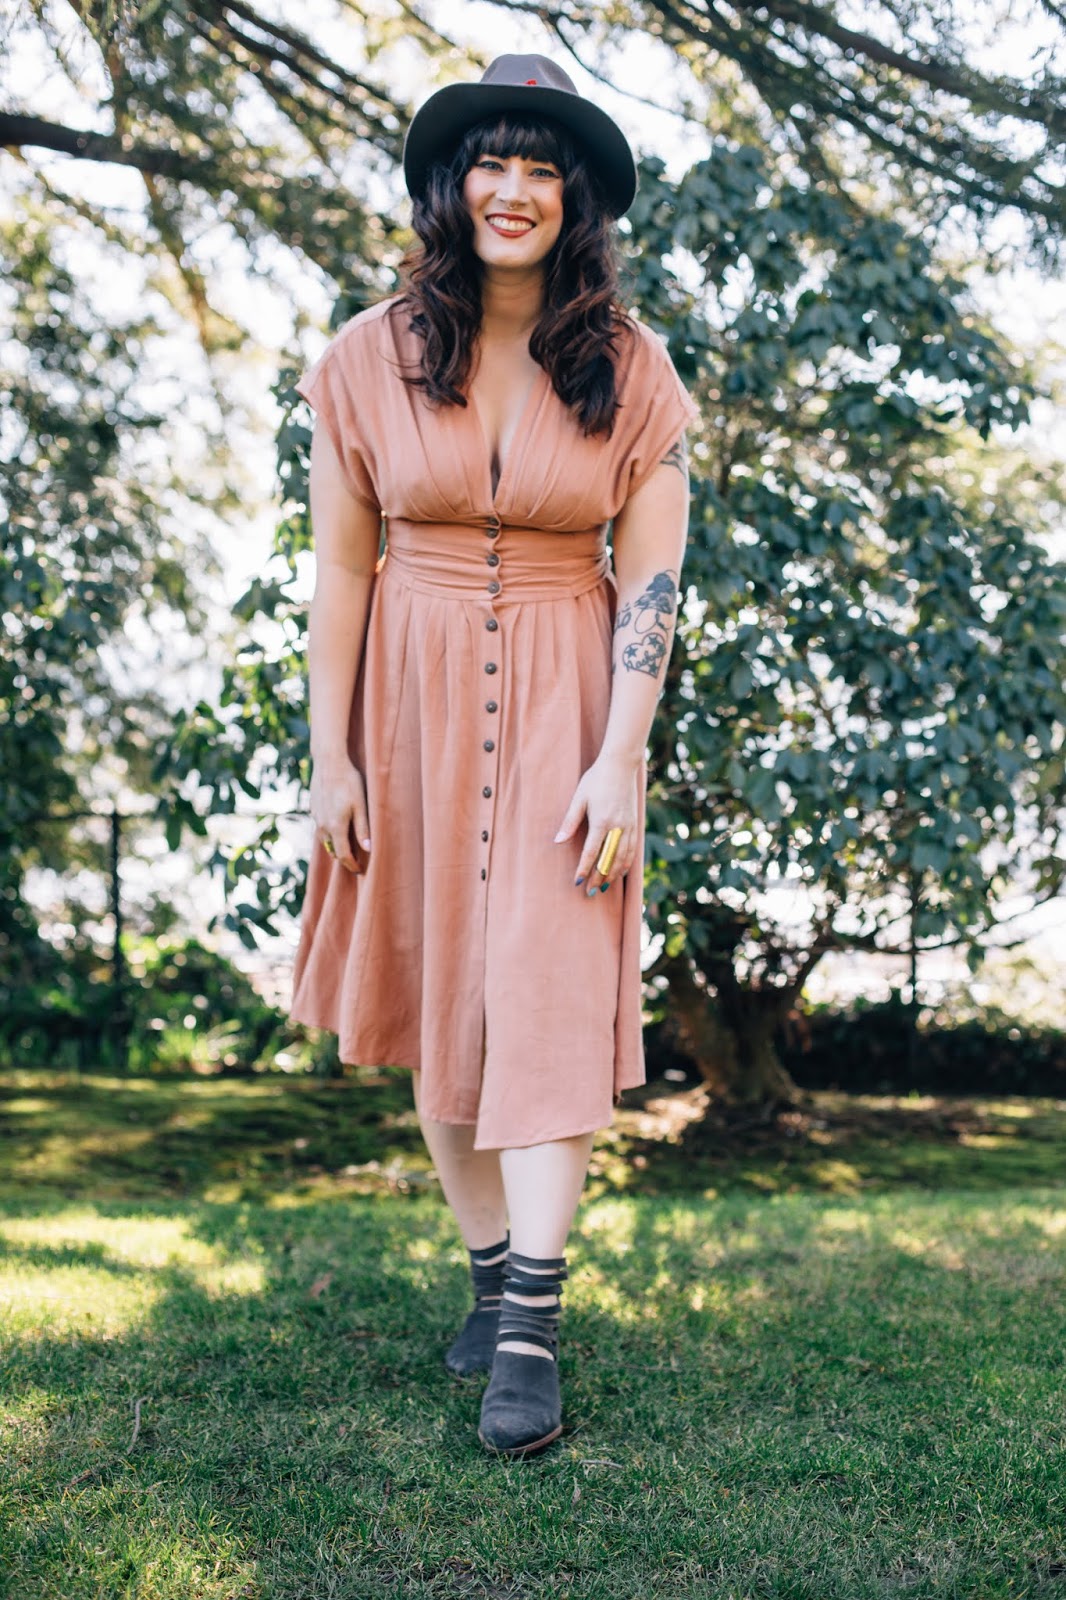 Eco Vibe Apparel, Affordable, Ethical Fashion | Miss Honey Lavender